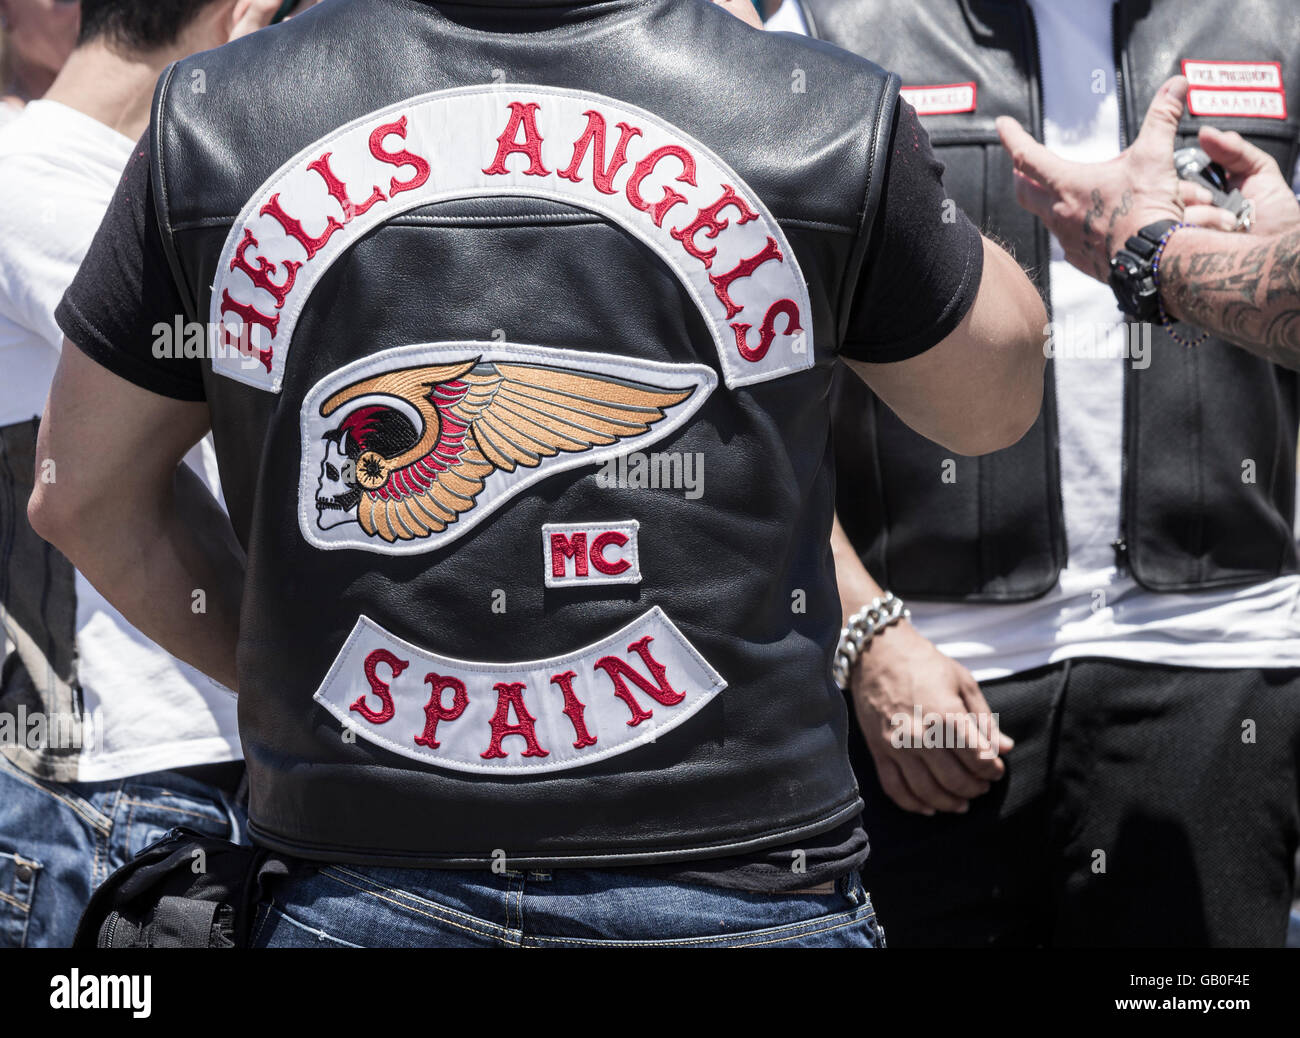 how did the hells angels get their name what does it mean and where did they come from